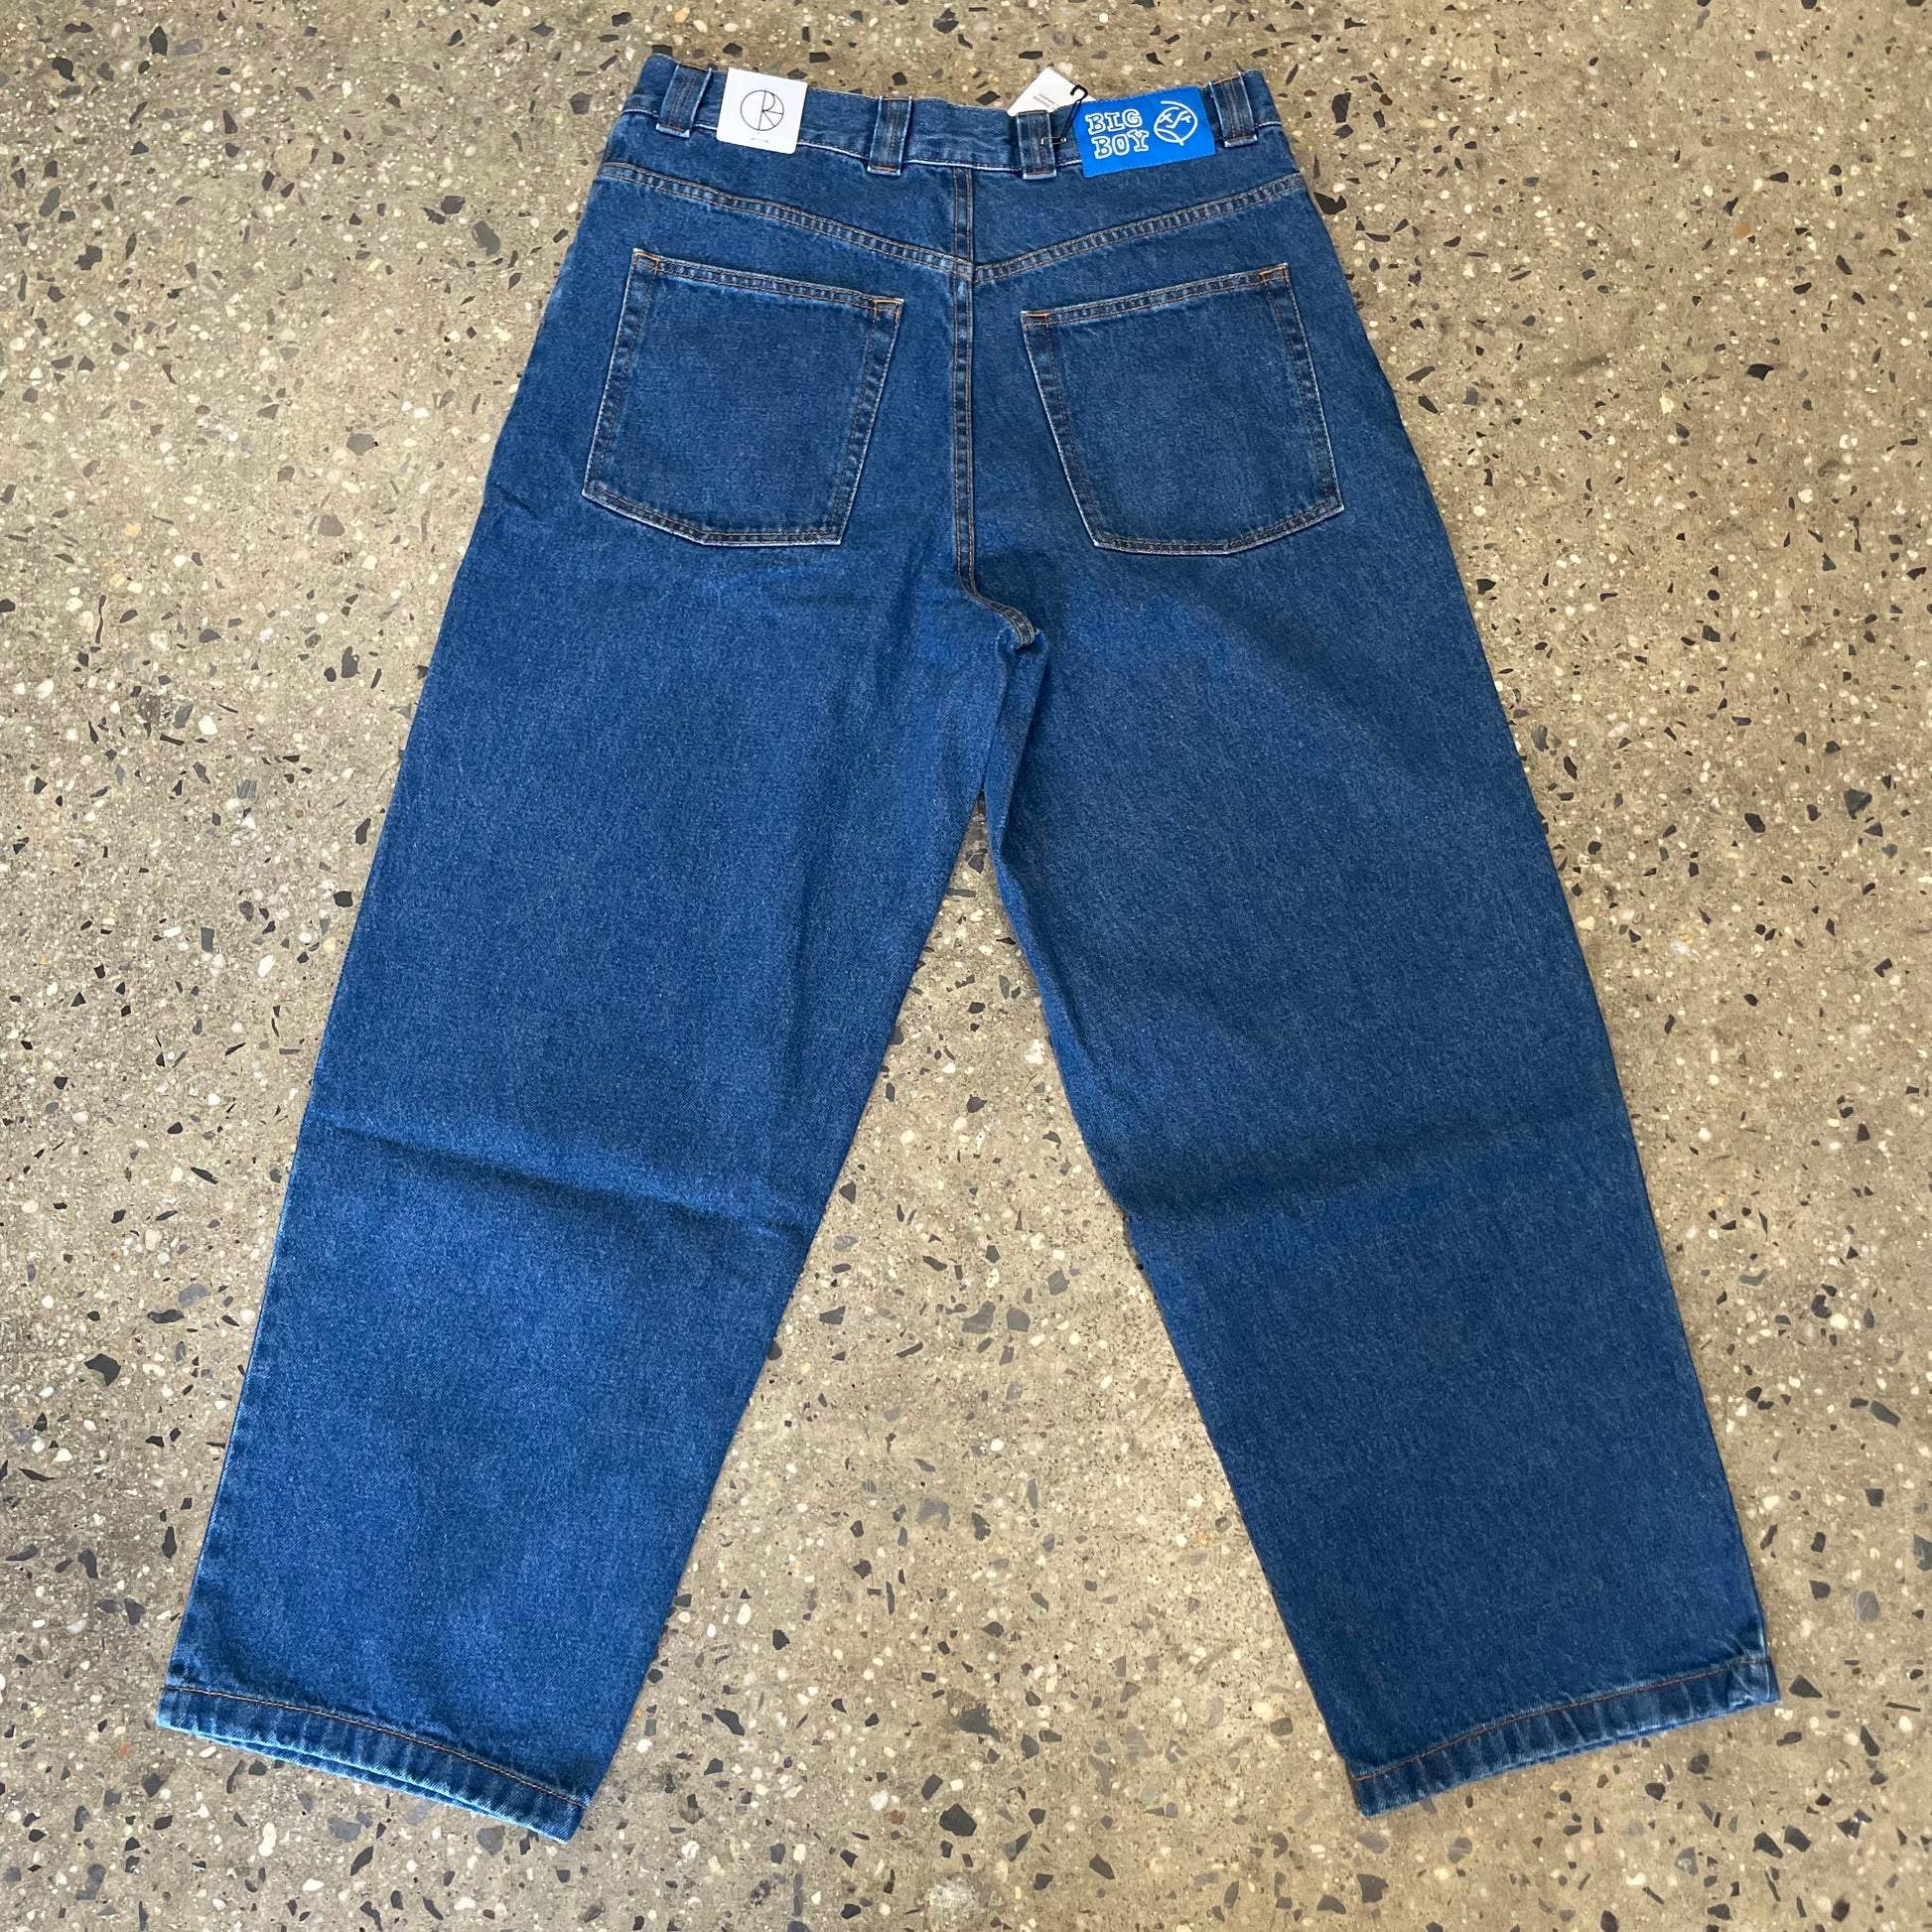 back view of jeans with 2 pockets